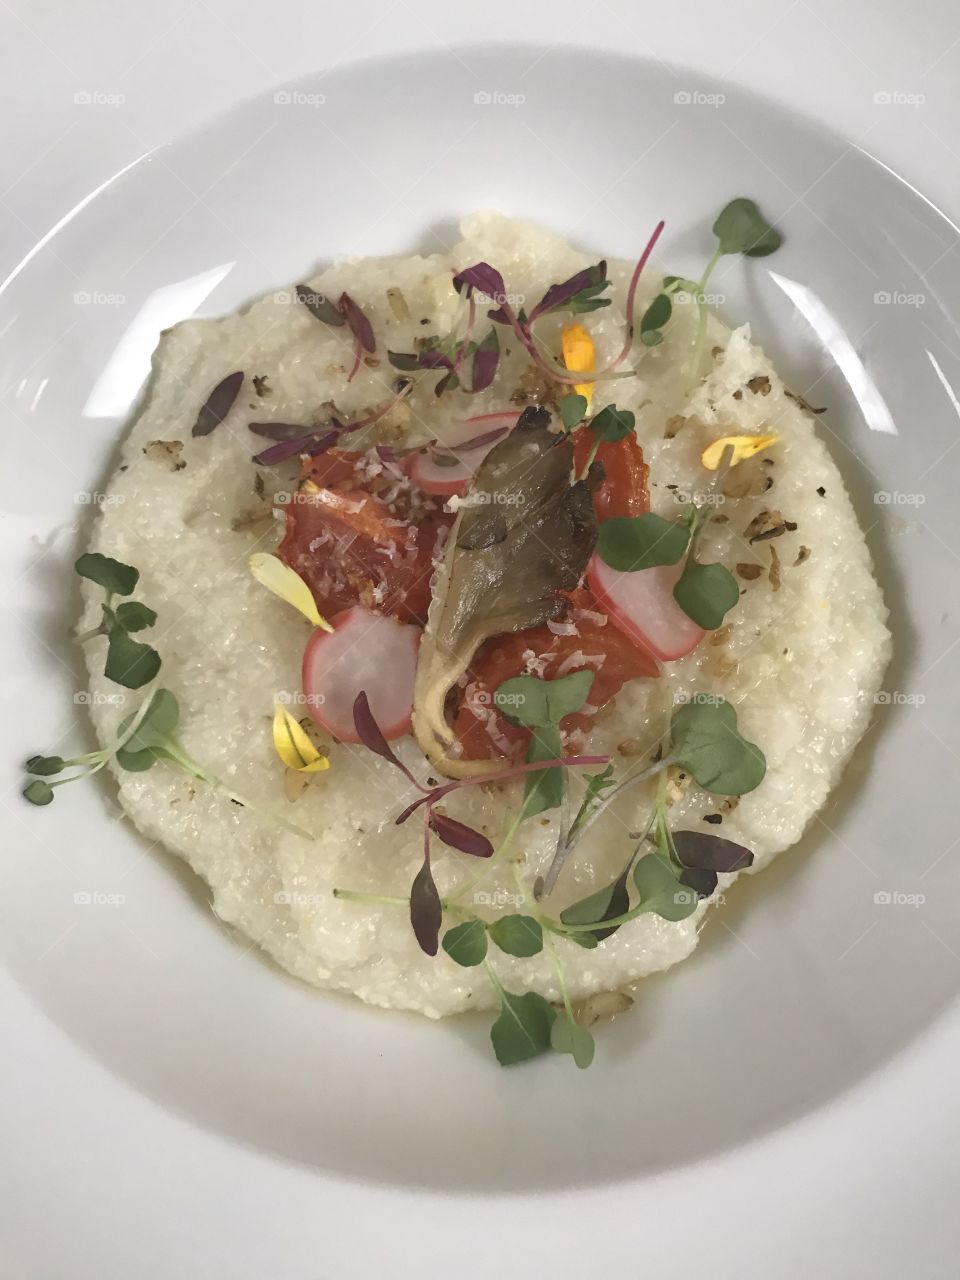 Elegant take on classic grits. Mushrooms, radishes, and a small salad of micro greens result in a dynamic photo of this beautiful dish. 